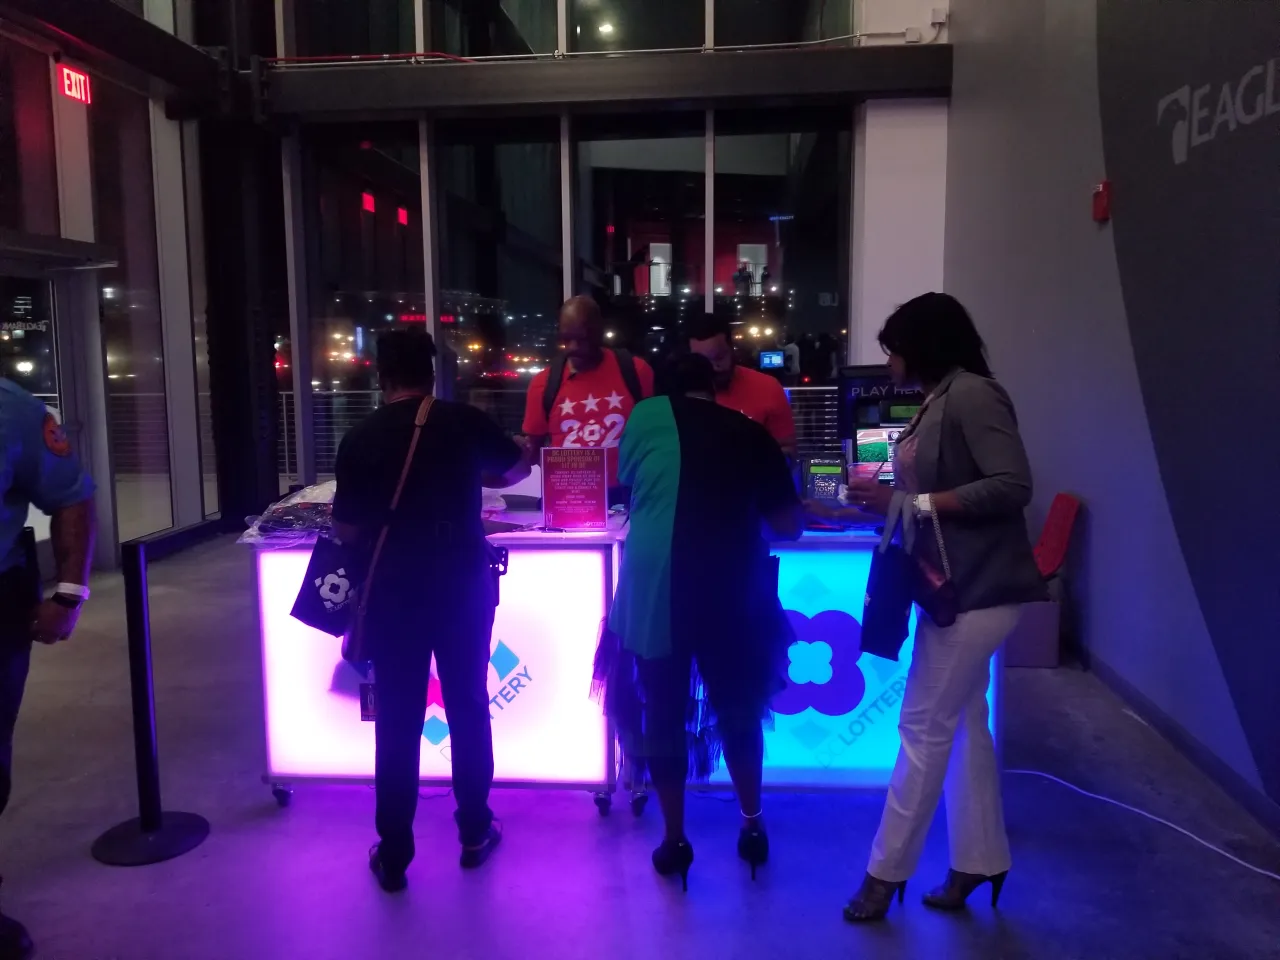 players waiting to purchase tickets at kiosk